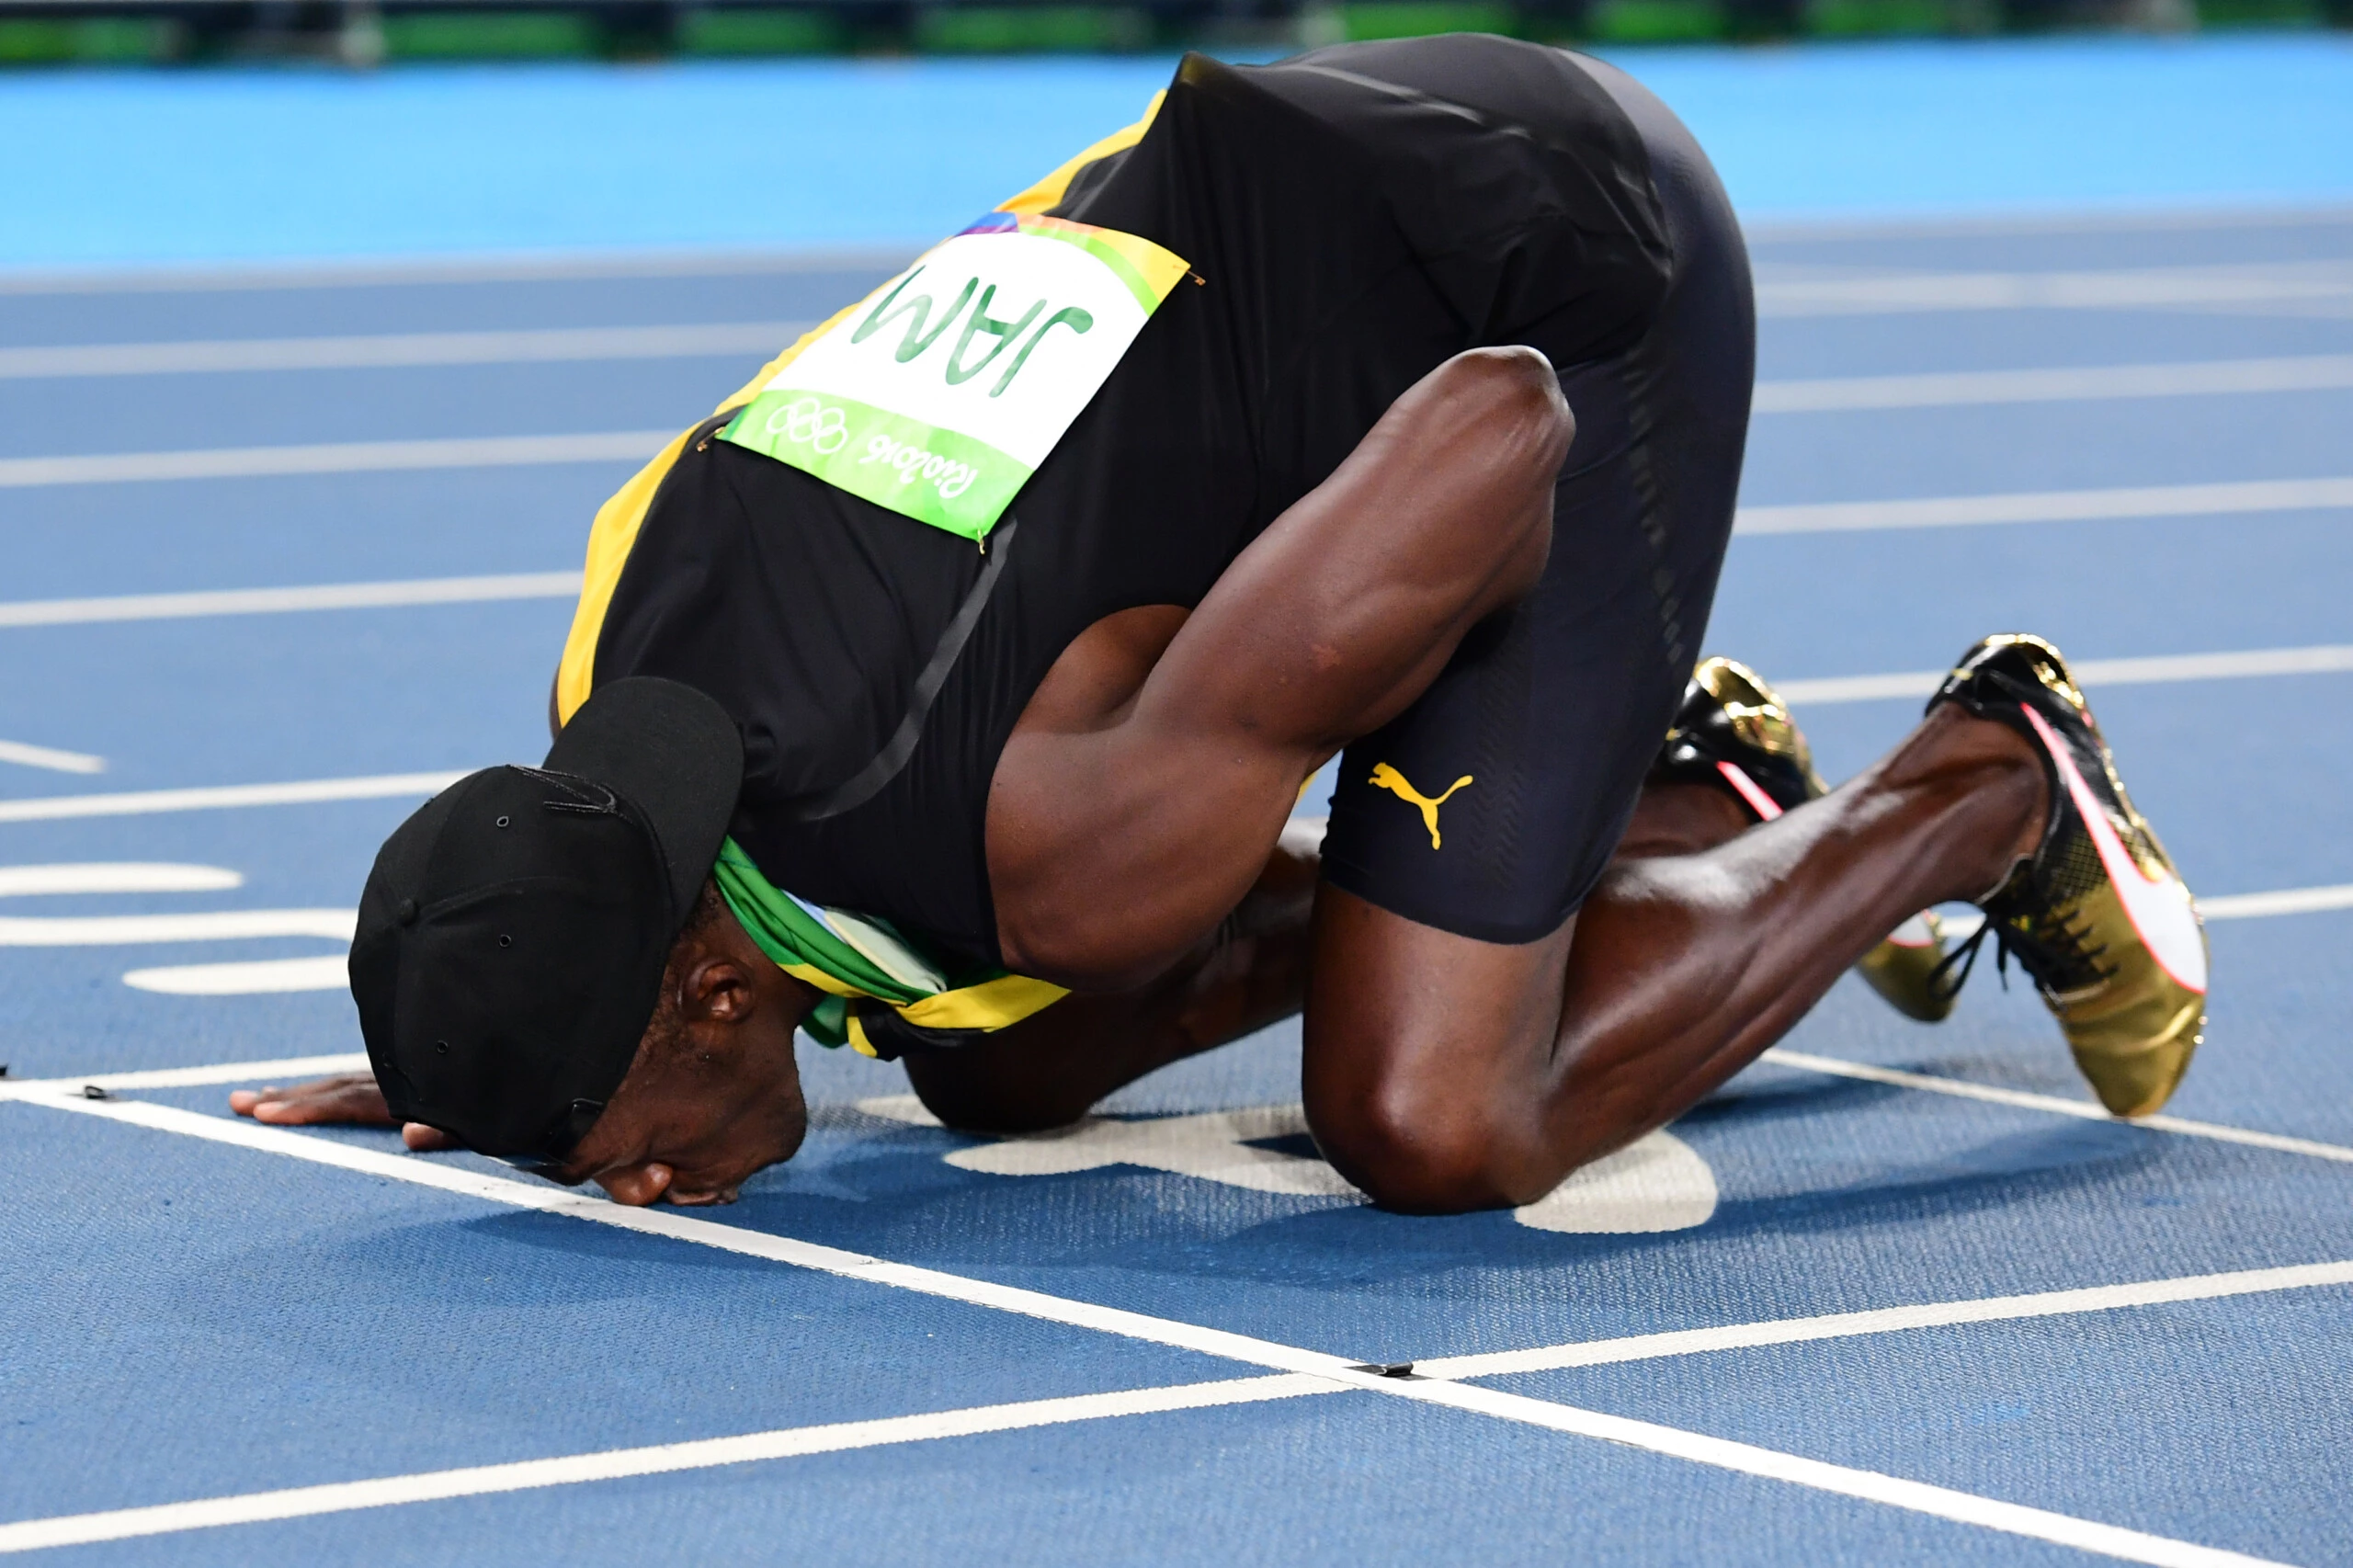 Jamaica's Usain Bolt kisses the track as he celebrates Team Jamaica winning the Men's 4x100m Relay Final during the athletics event at the Rio 2016 Olympic Games at the Olympic Stadium in Rio de Janeiro on August 19, 2016.   / AFP / FRANCK FIFE        (Photo credit should read FRANCK FIFE/AFP/Getty Images)